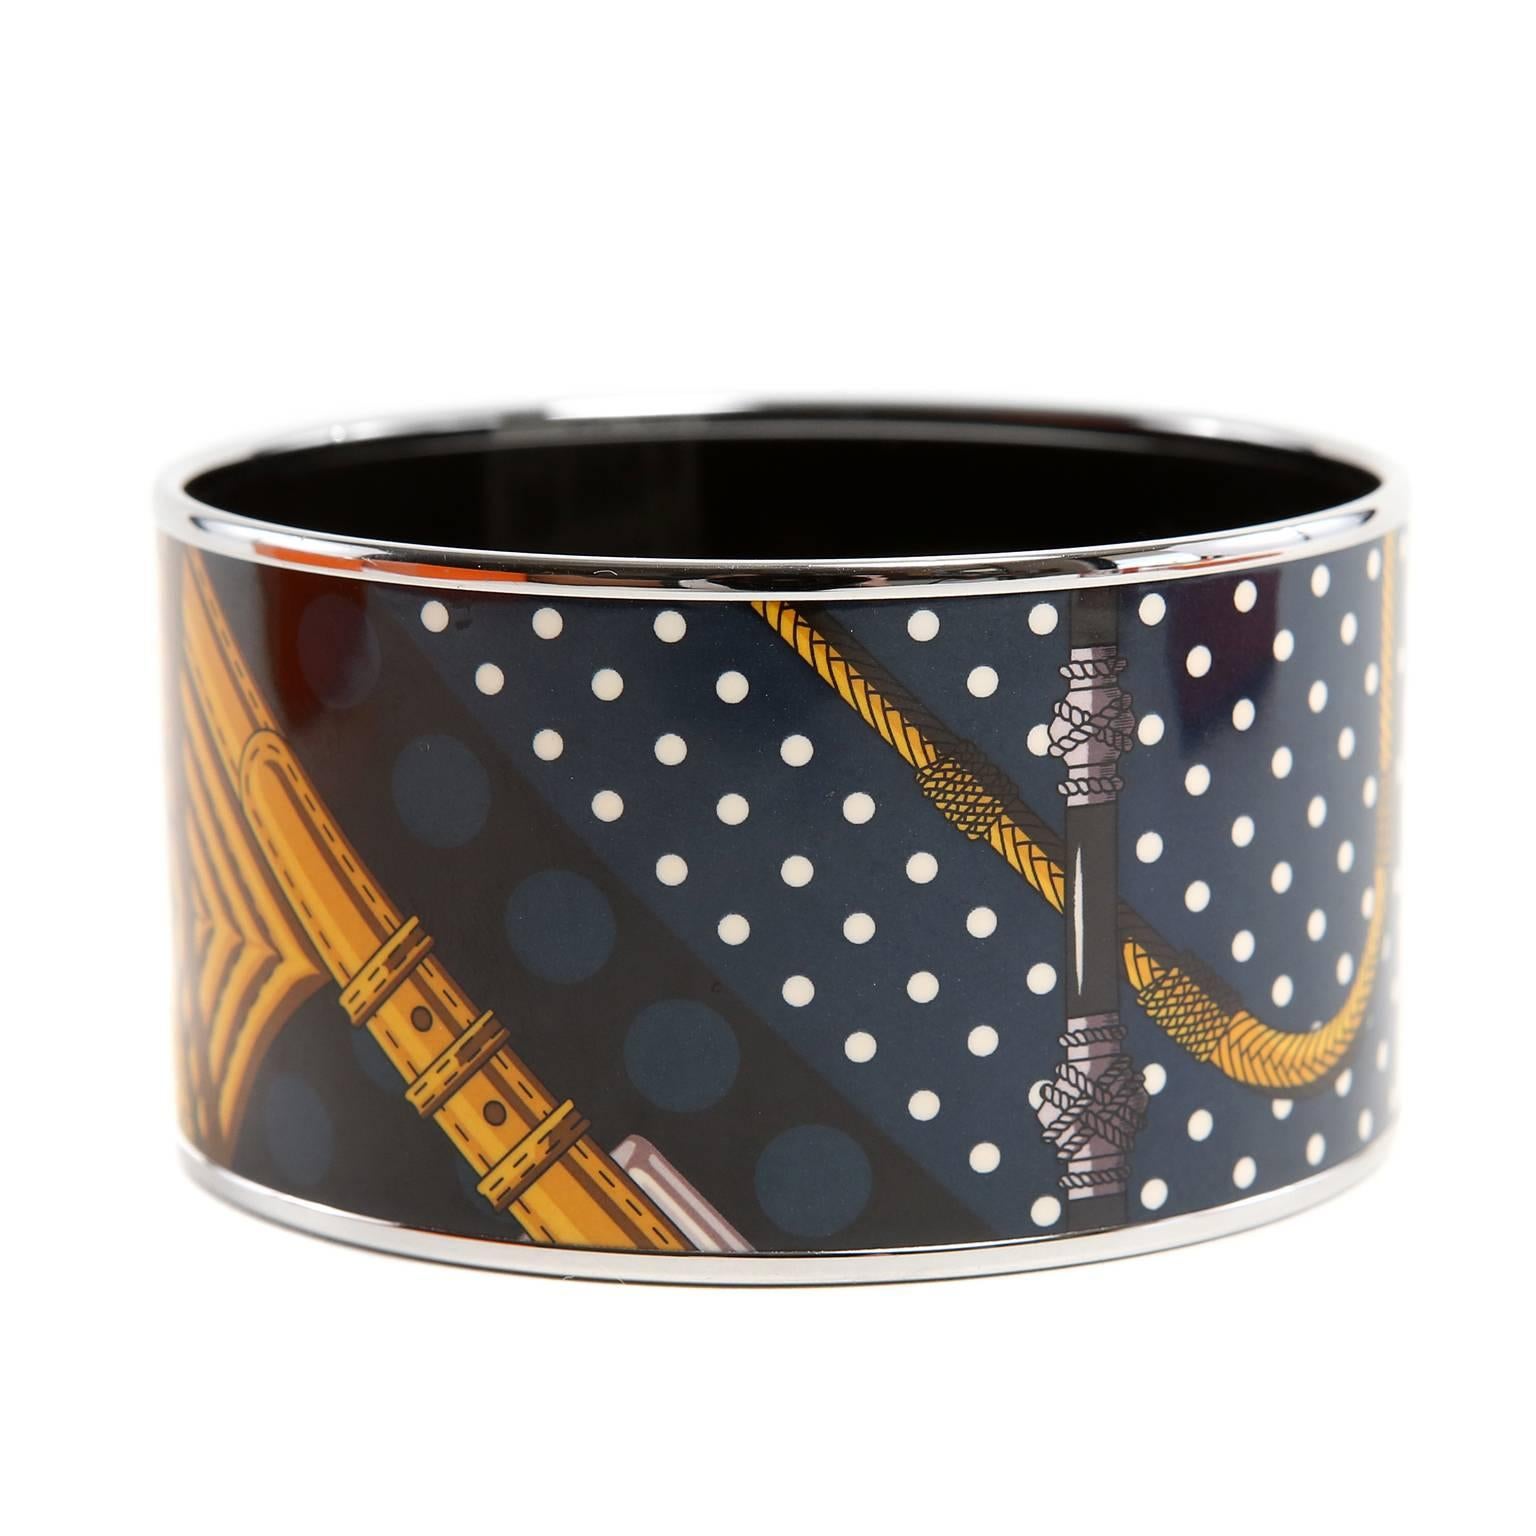 Hermès Black Enamel XL Cuff Bracelet- PRISTINE
  The extra large bangle can be worn with everything from jeans to gowns. 
 
  Equestrian themed- black enamel with navy, white dots and gold rope design.  Made in France. Q stamp.     
HB5, HB9